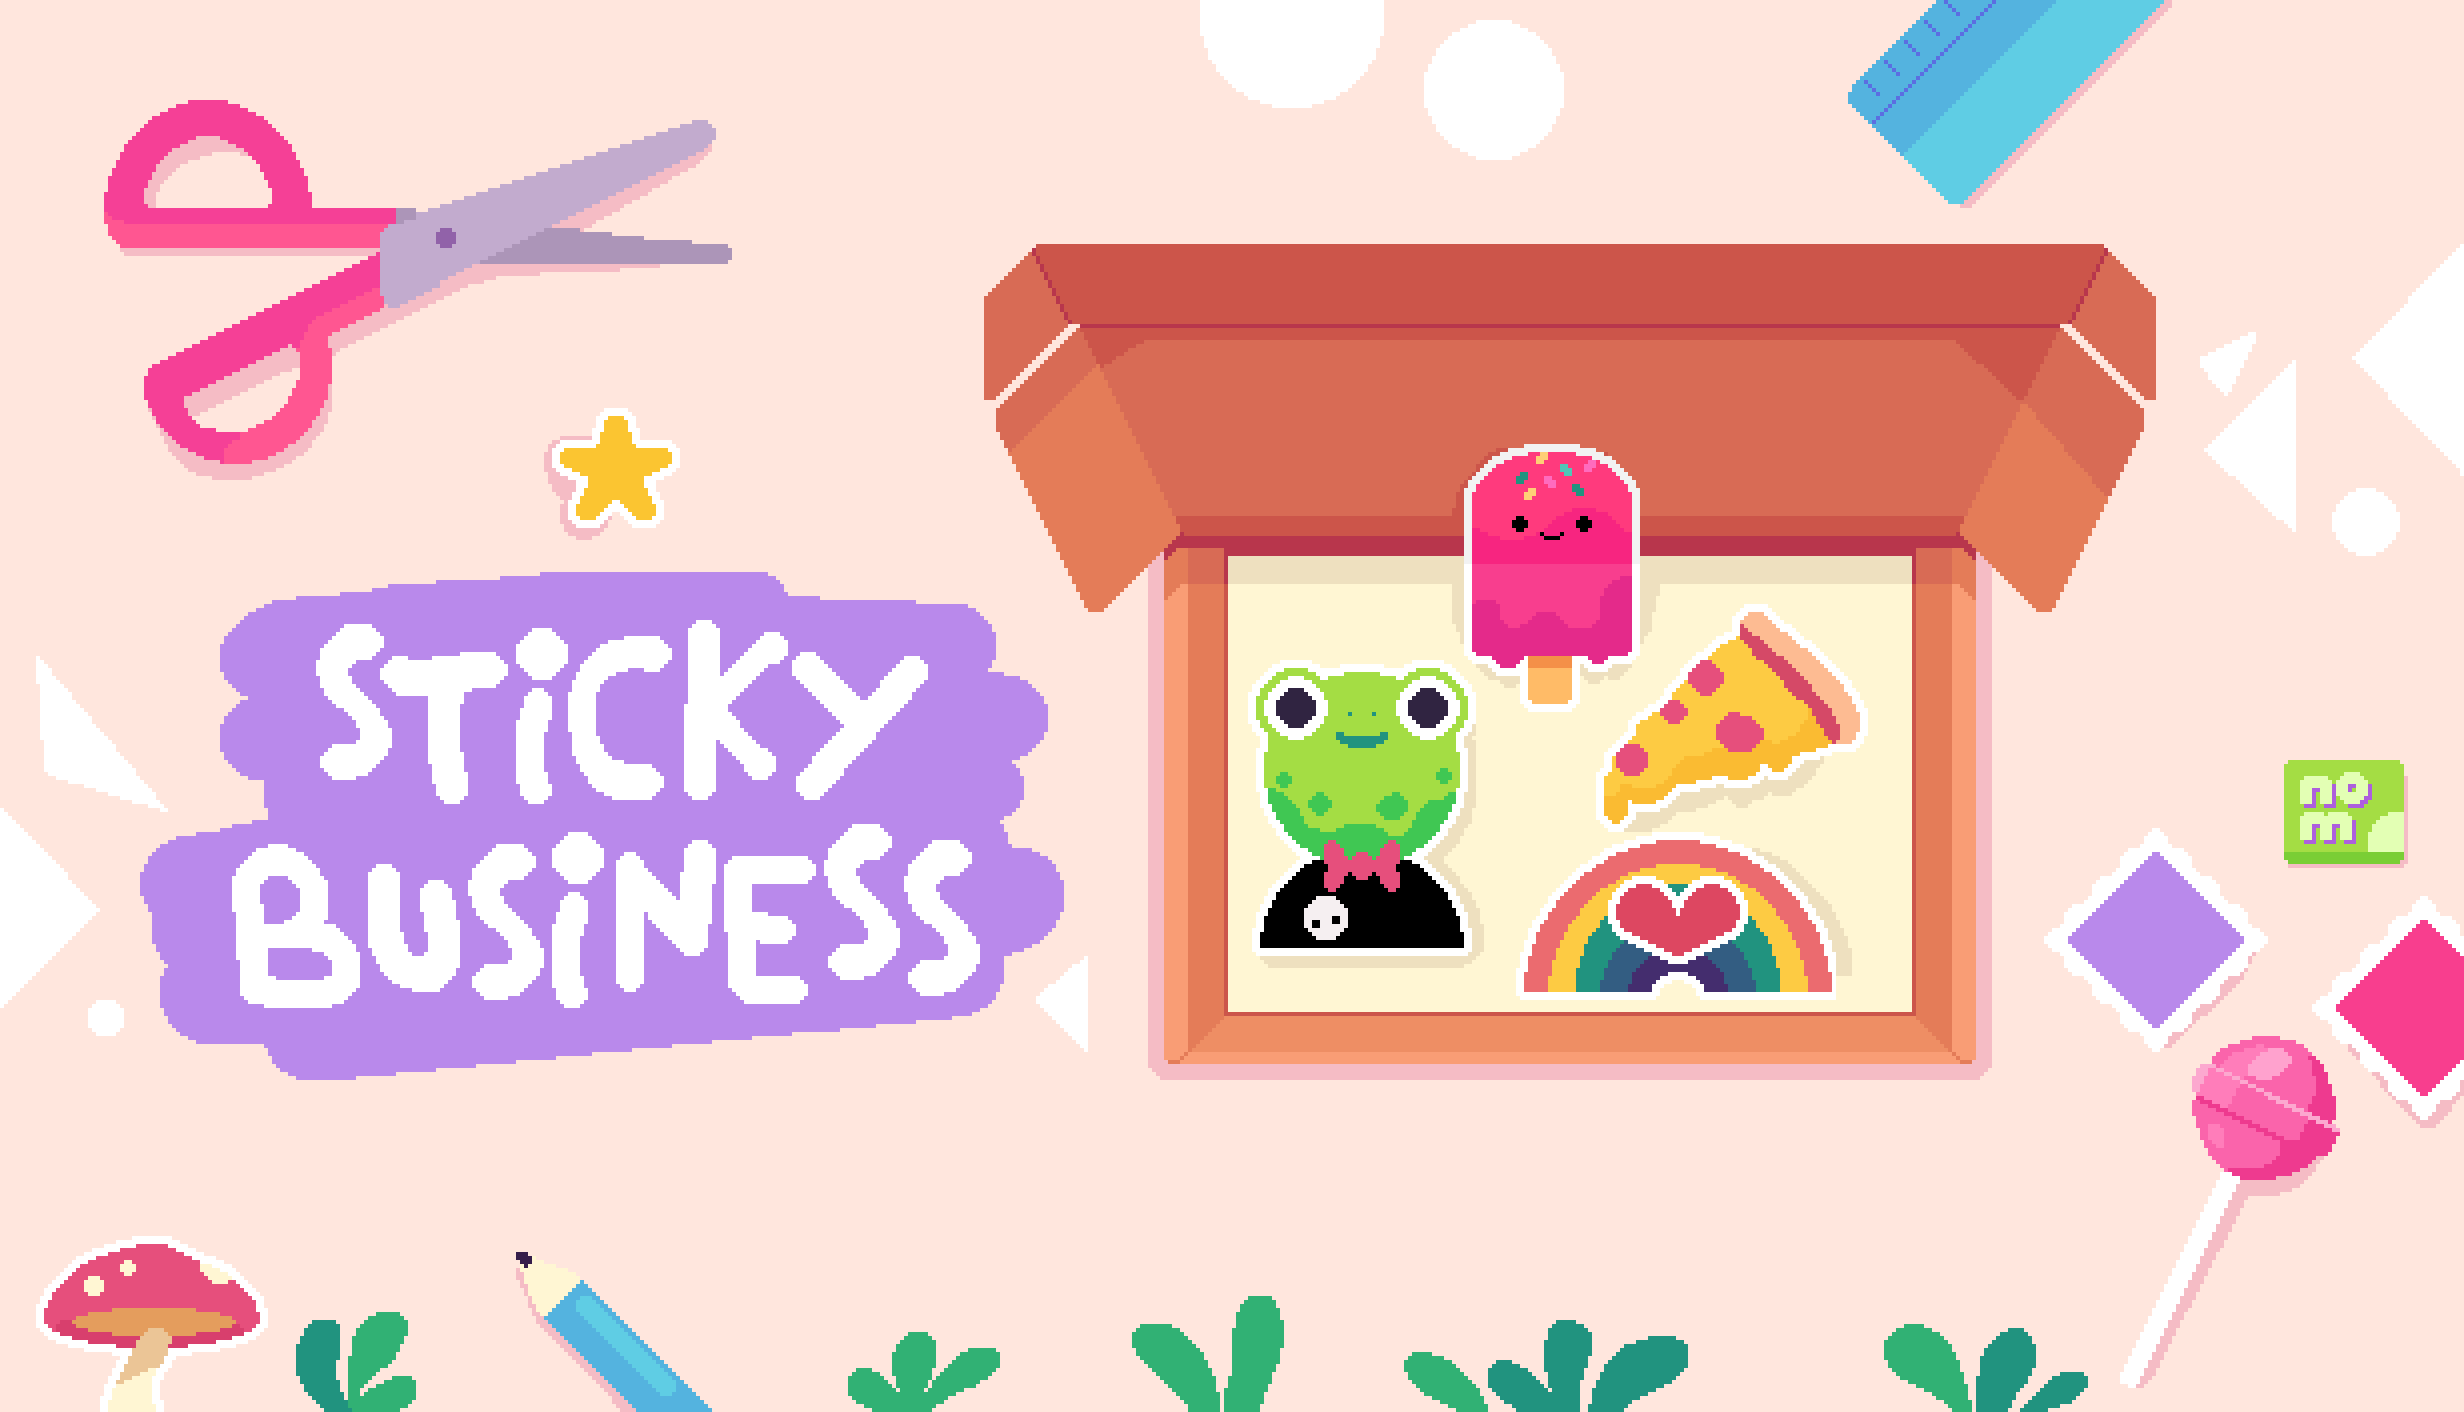 01_StickyBusiness_main_image_high_res.png